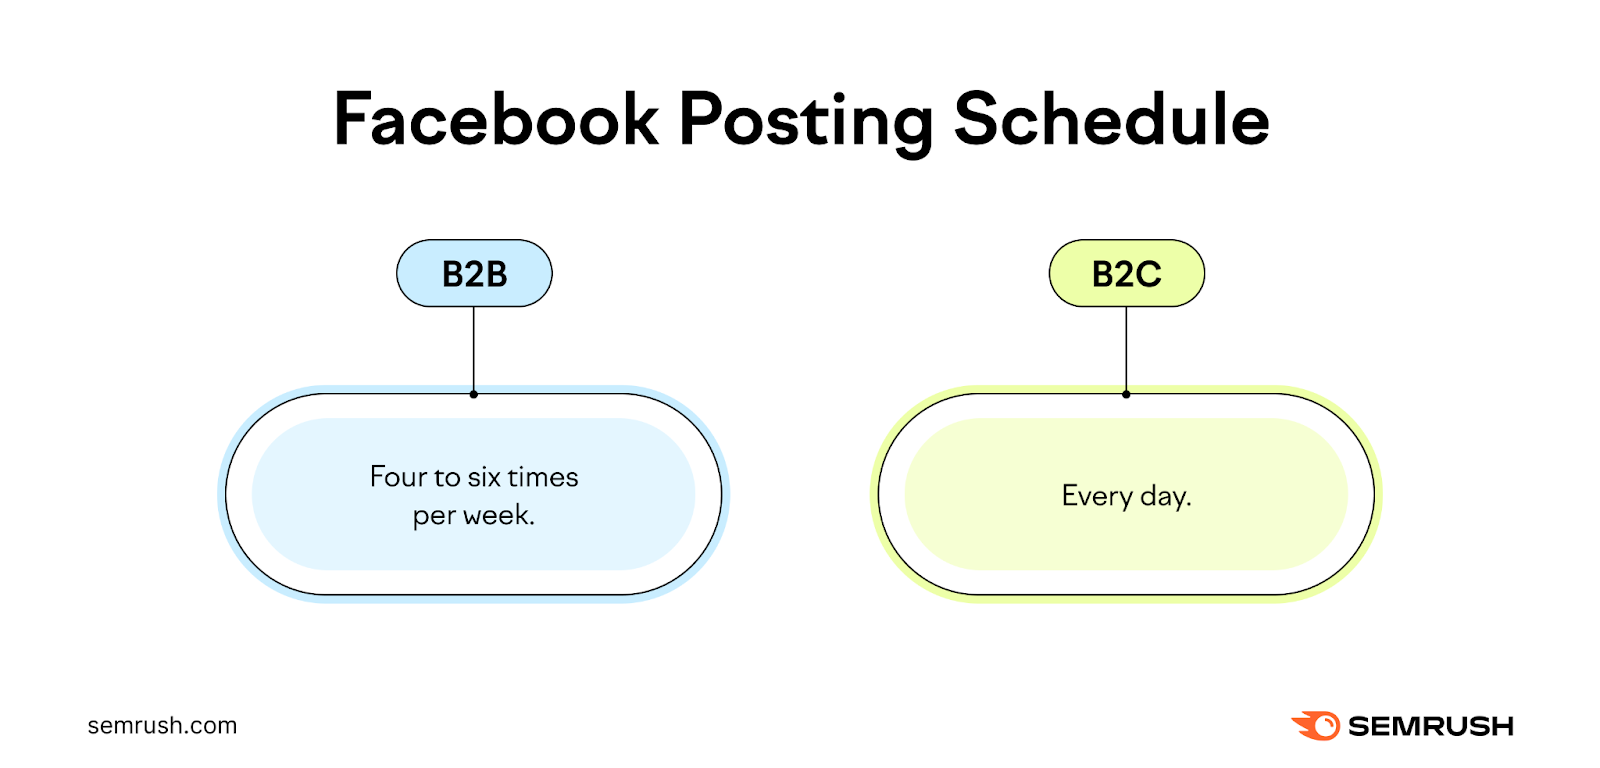 Facebook posting schedule recommendations (4-6 times a week for B2B and every day for B2C businesses)